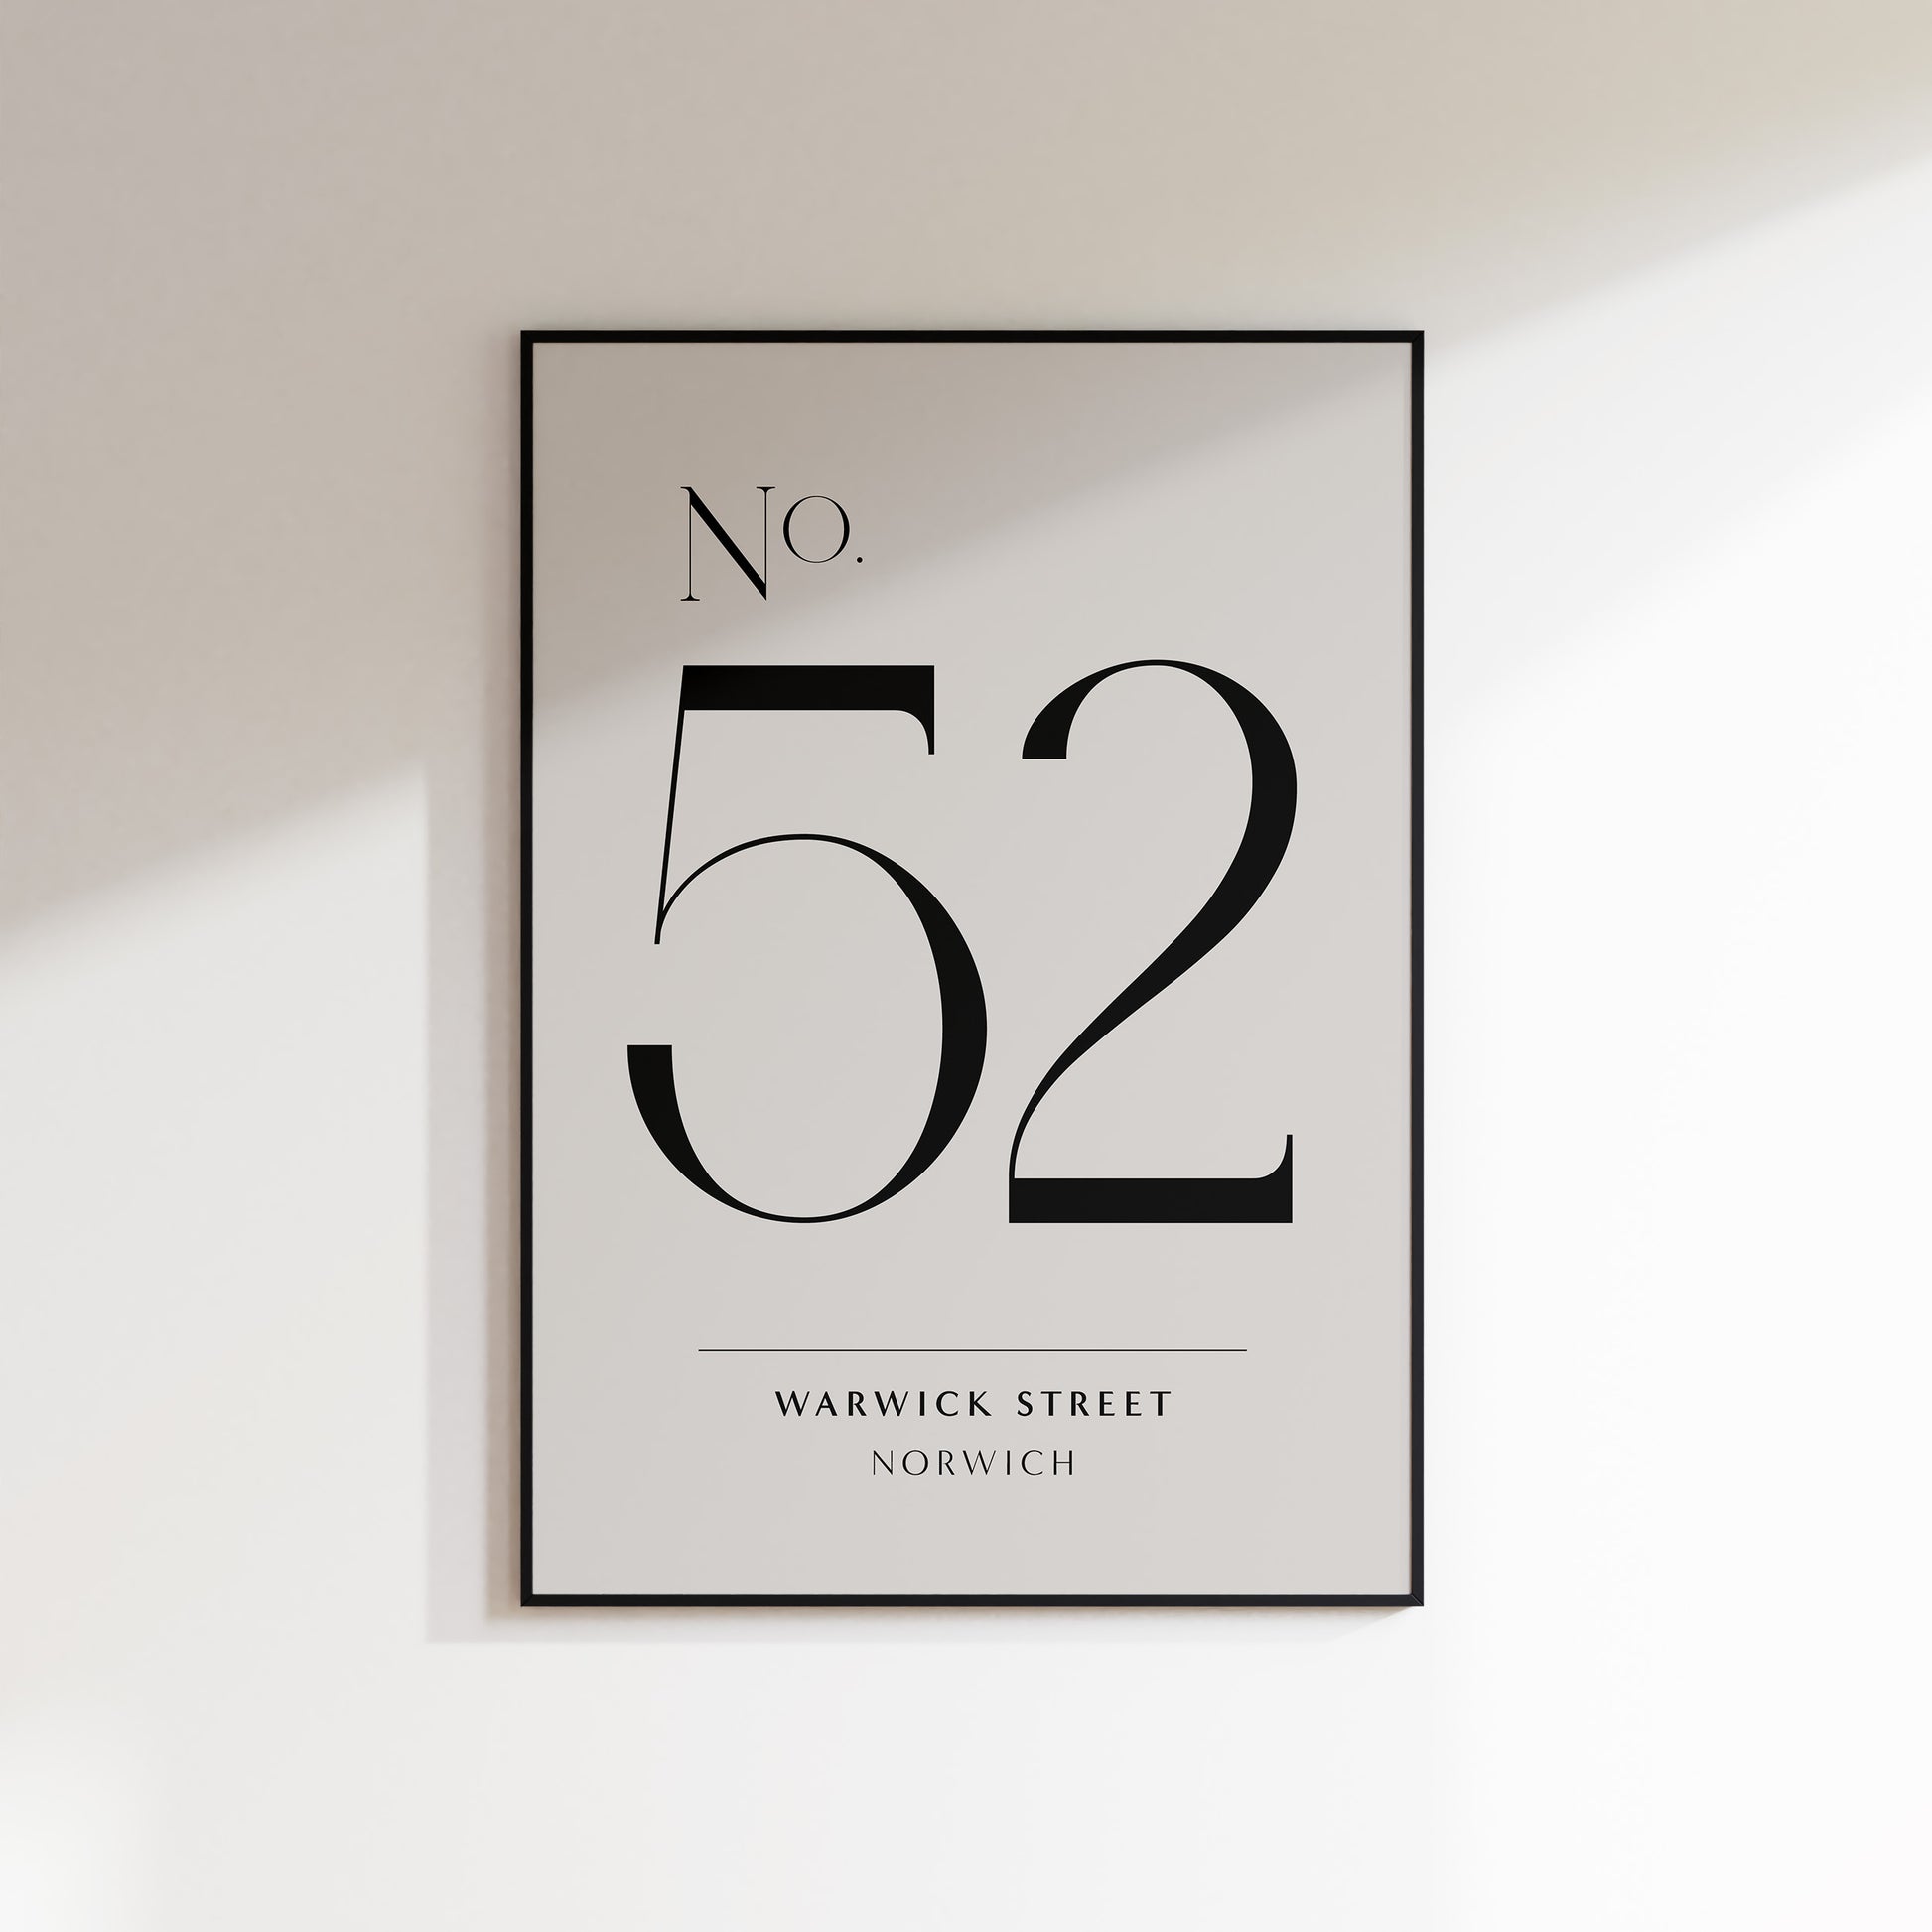 A house number print for the home, ideal for hallways, living rooms and bedrooms. This is a neutral beige coloured print with a slate coloured house number in a deco style serif typeface, and the street name and location underneath. Print is in a black frame on a white wall background.